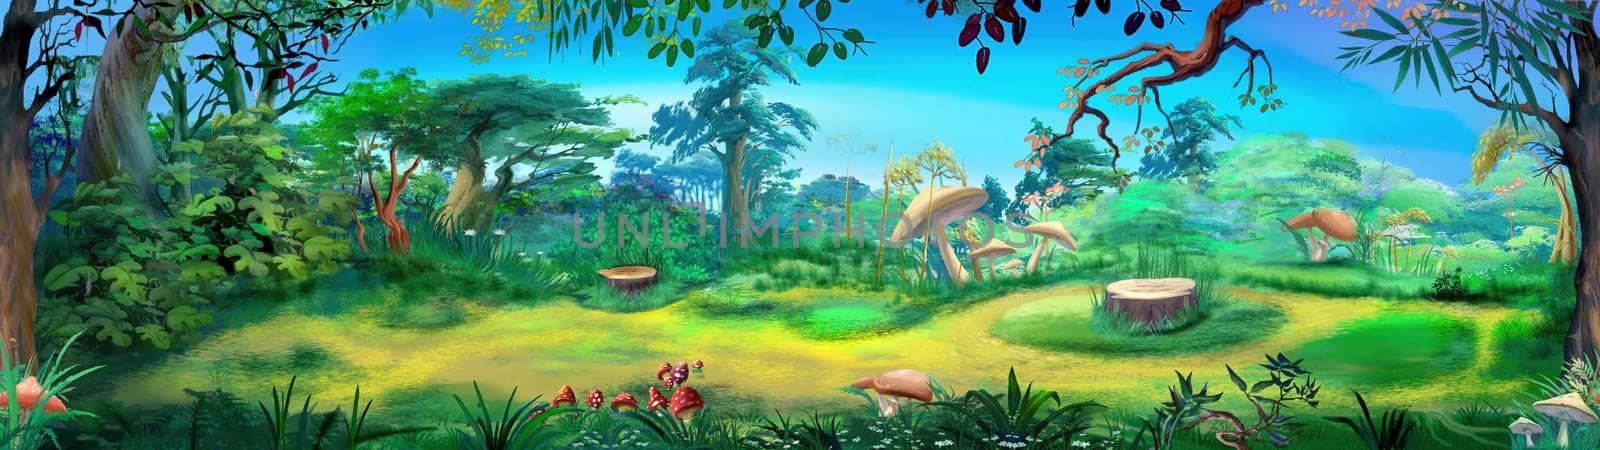 Forest glade on a summer day illustration by Multipedia